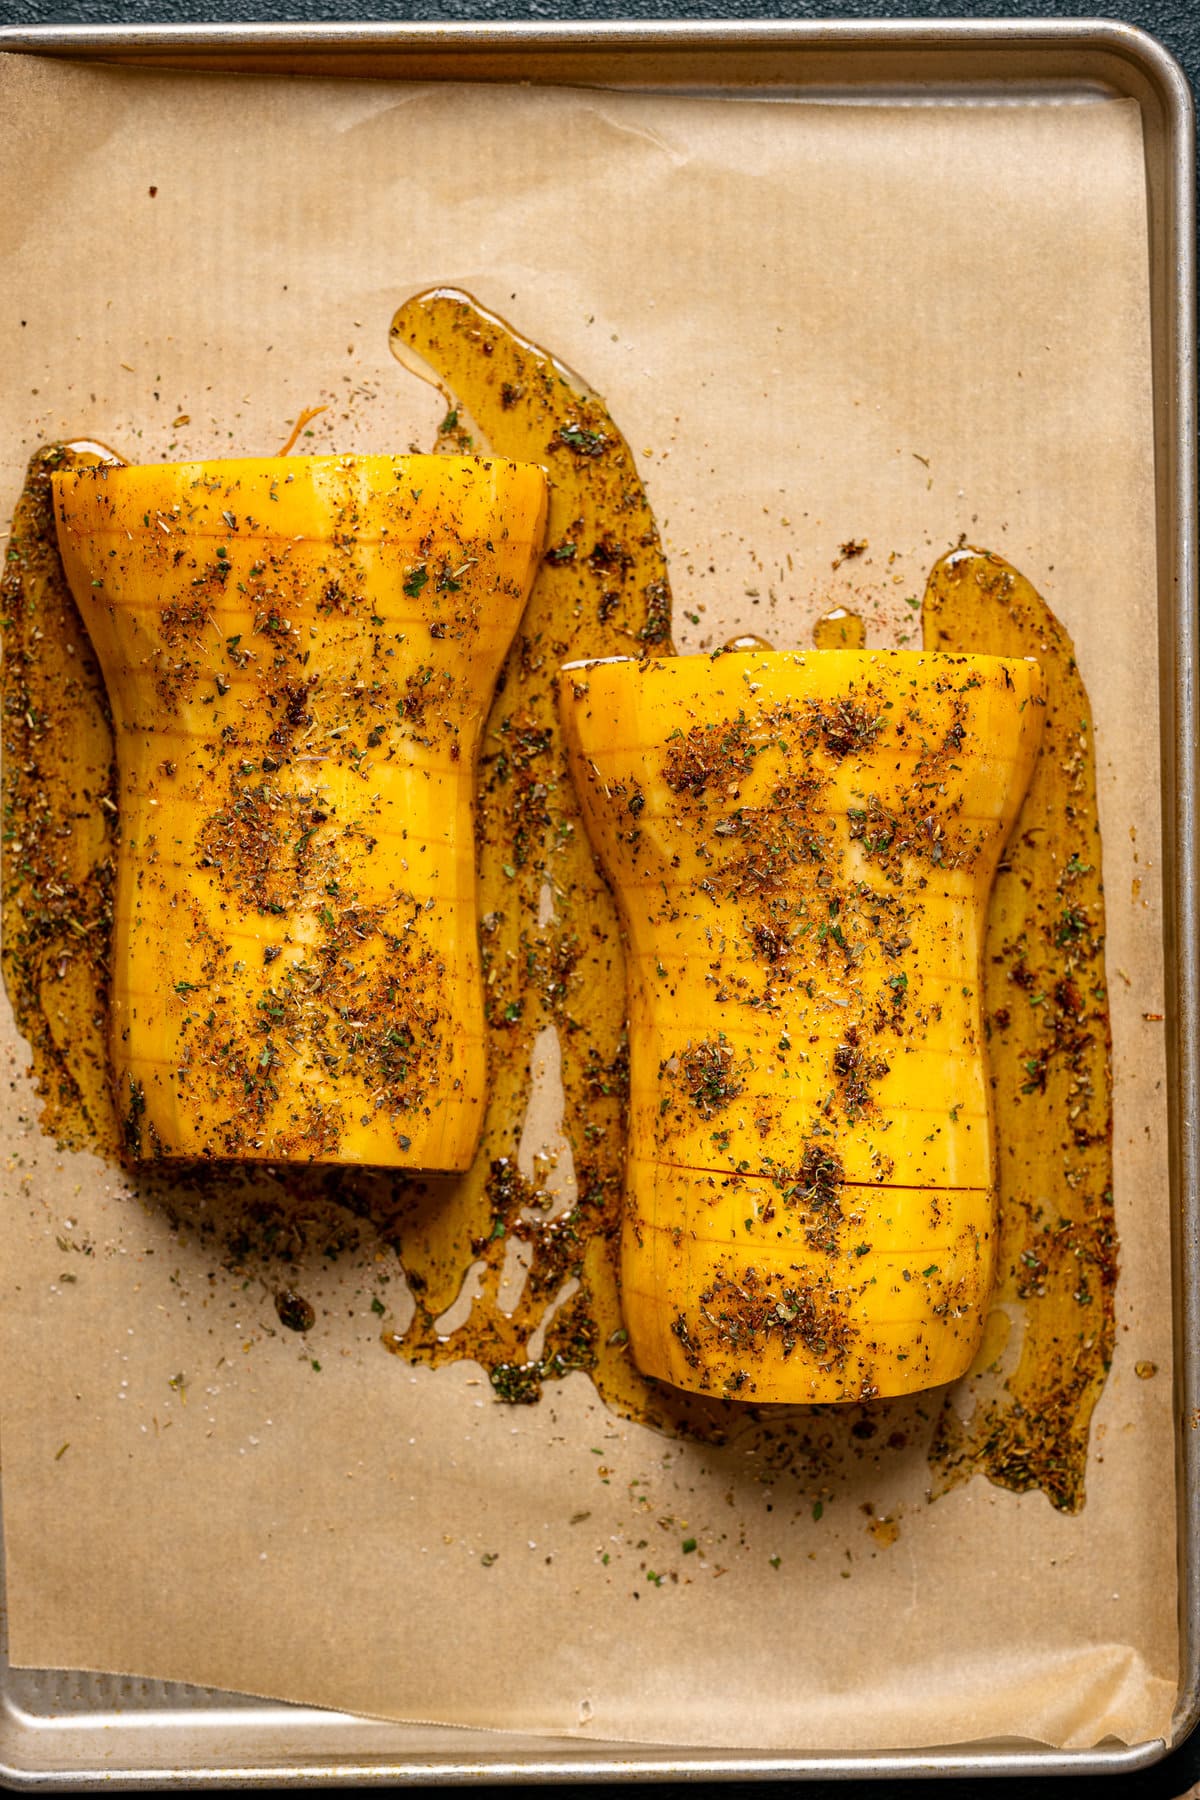 Sliced, halved, and seasoned butternut squash on a baking sheet